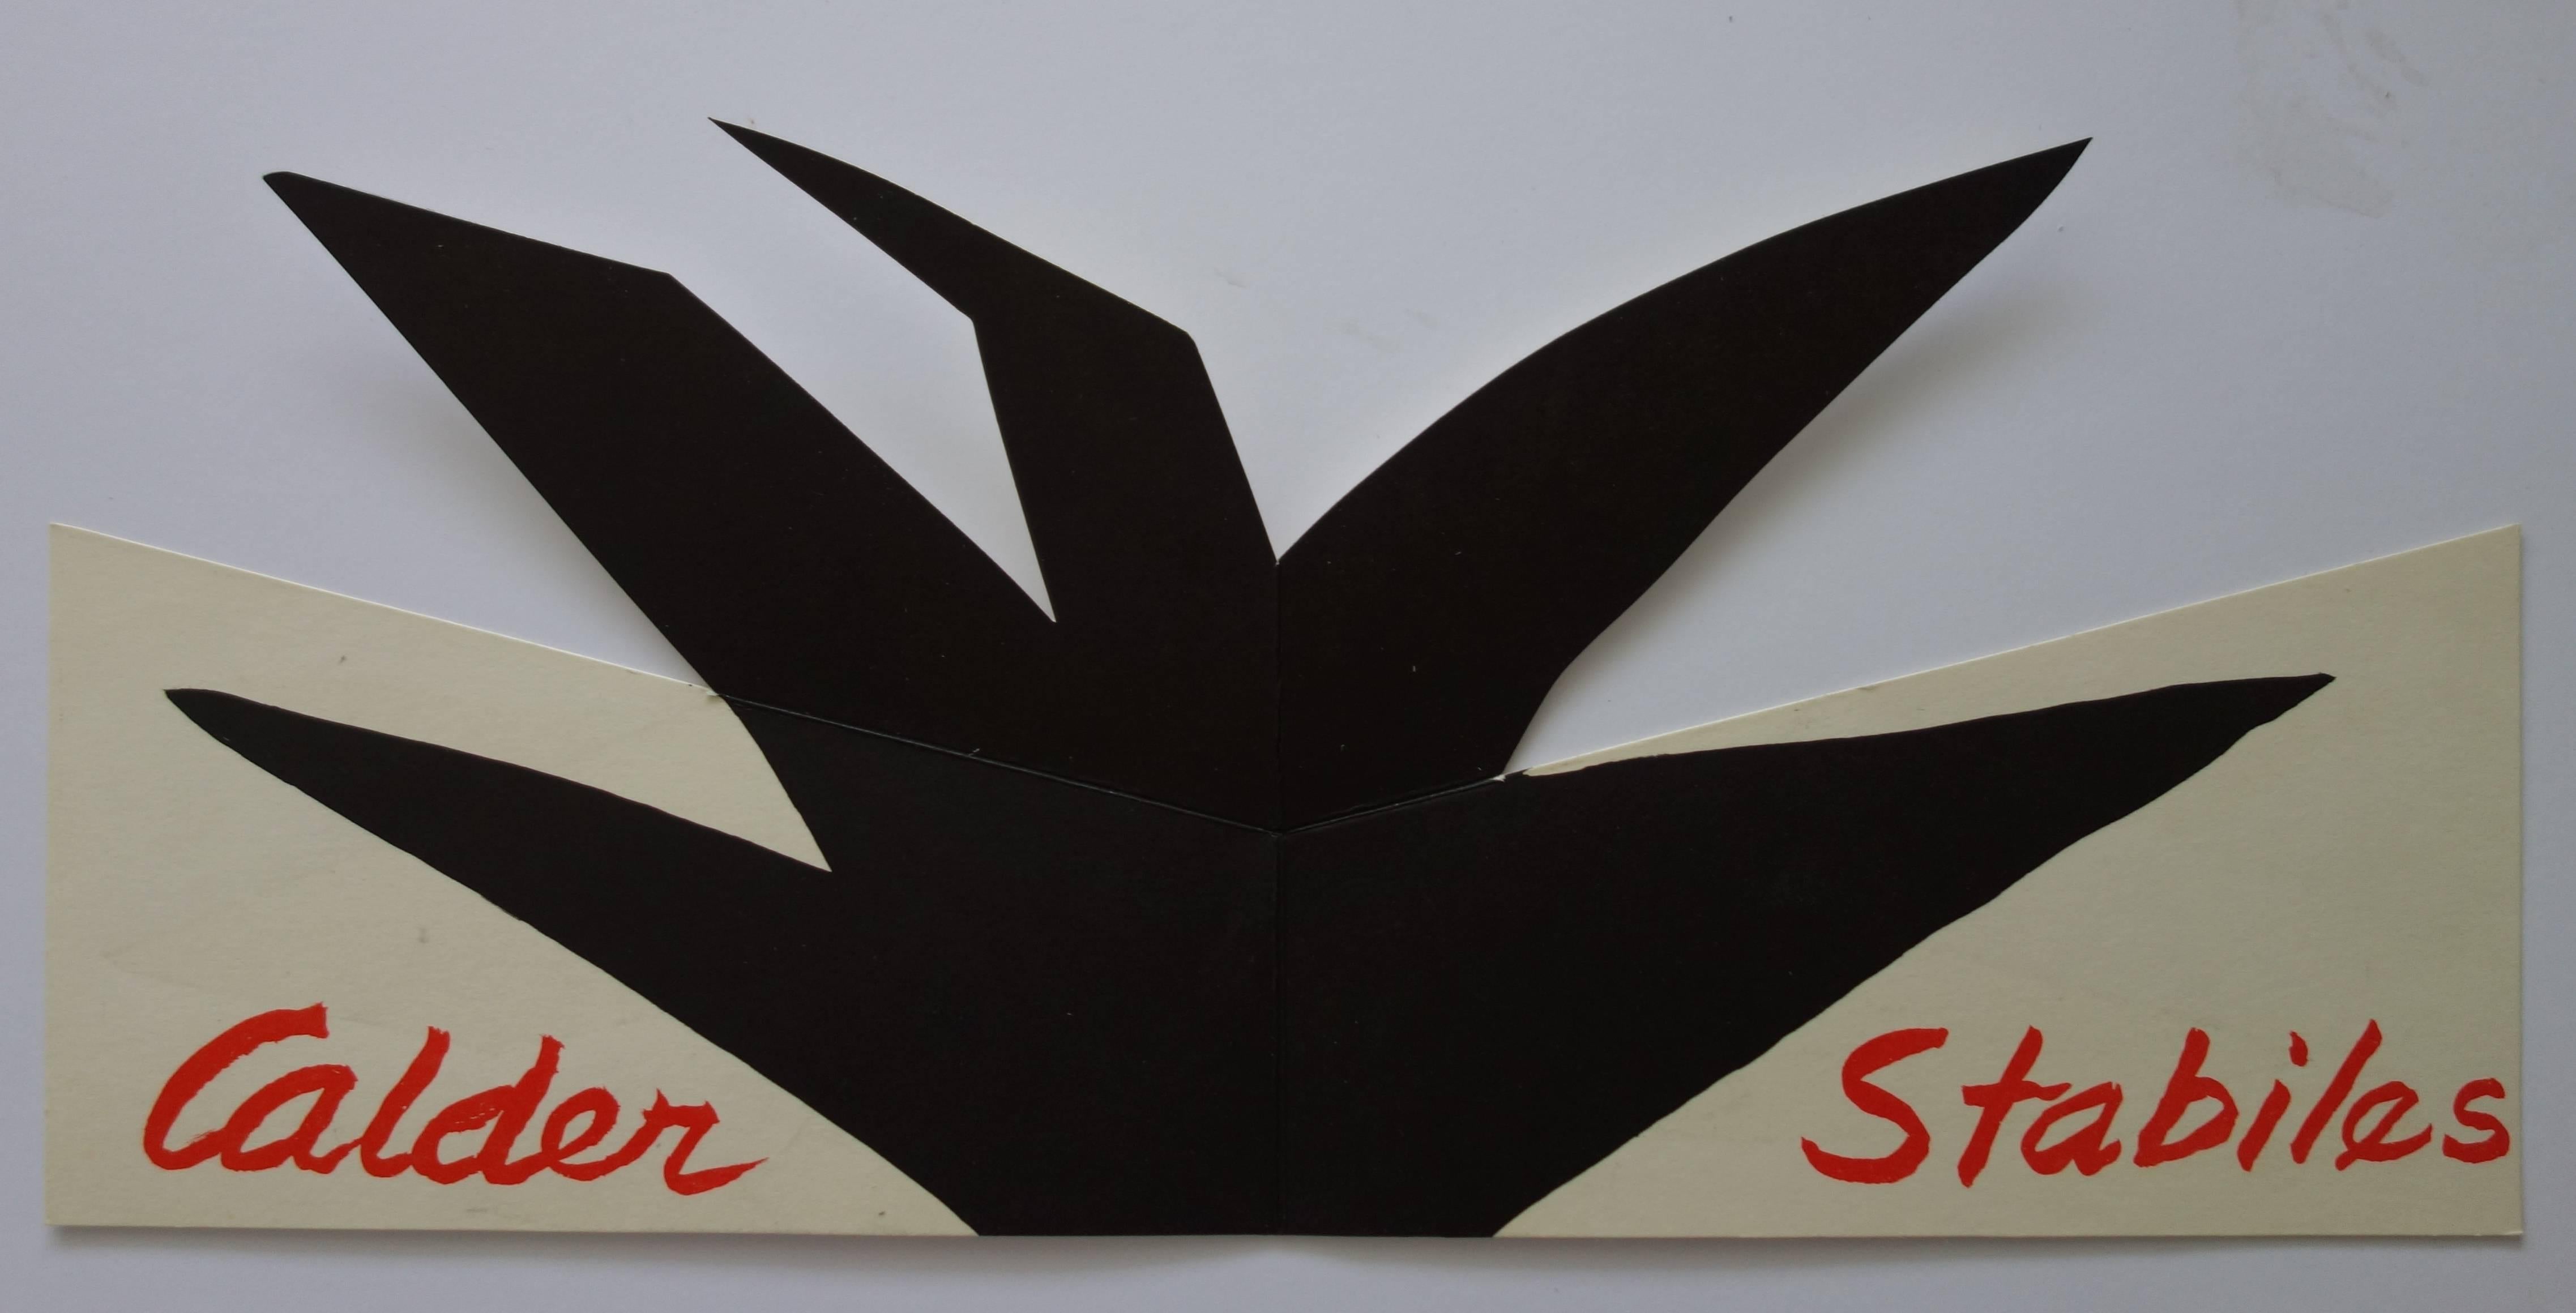 Stabiles - Original lithographic pop-up card - Plate signed - Maeght 1963 - Print by Alexander Calder